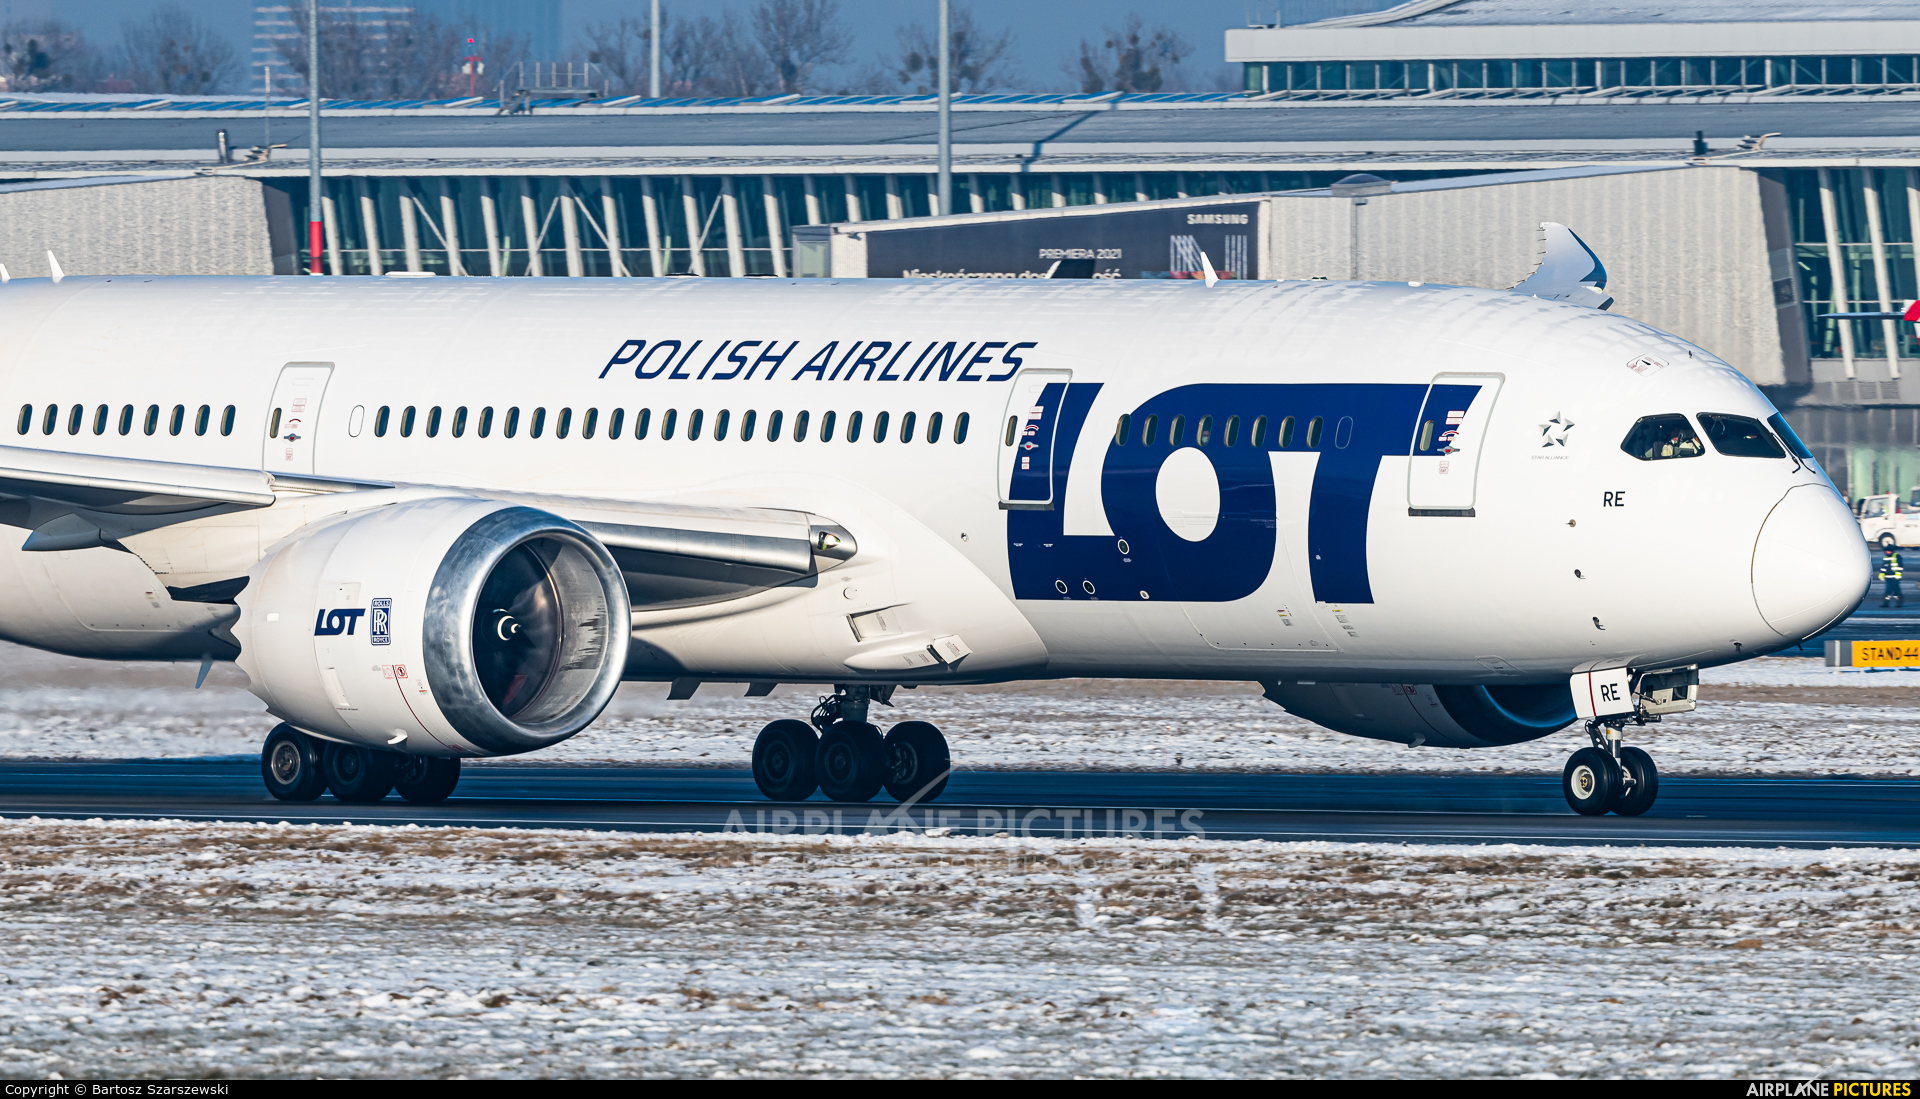 LOT - Polish Airlines SP-LRE aircraft at Warsaw - Frederic Chopin